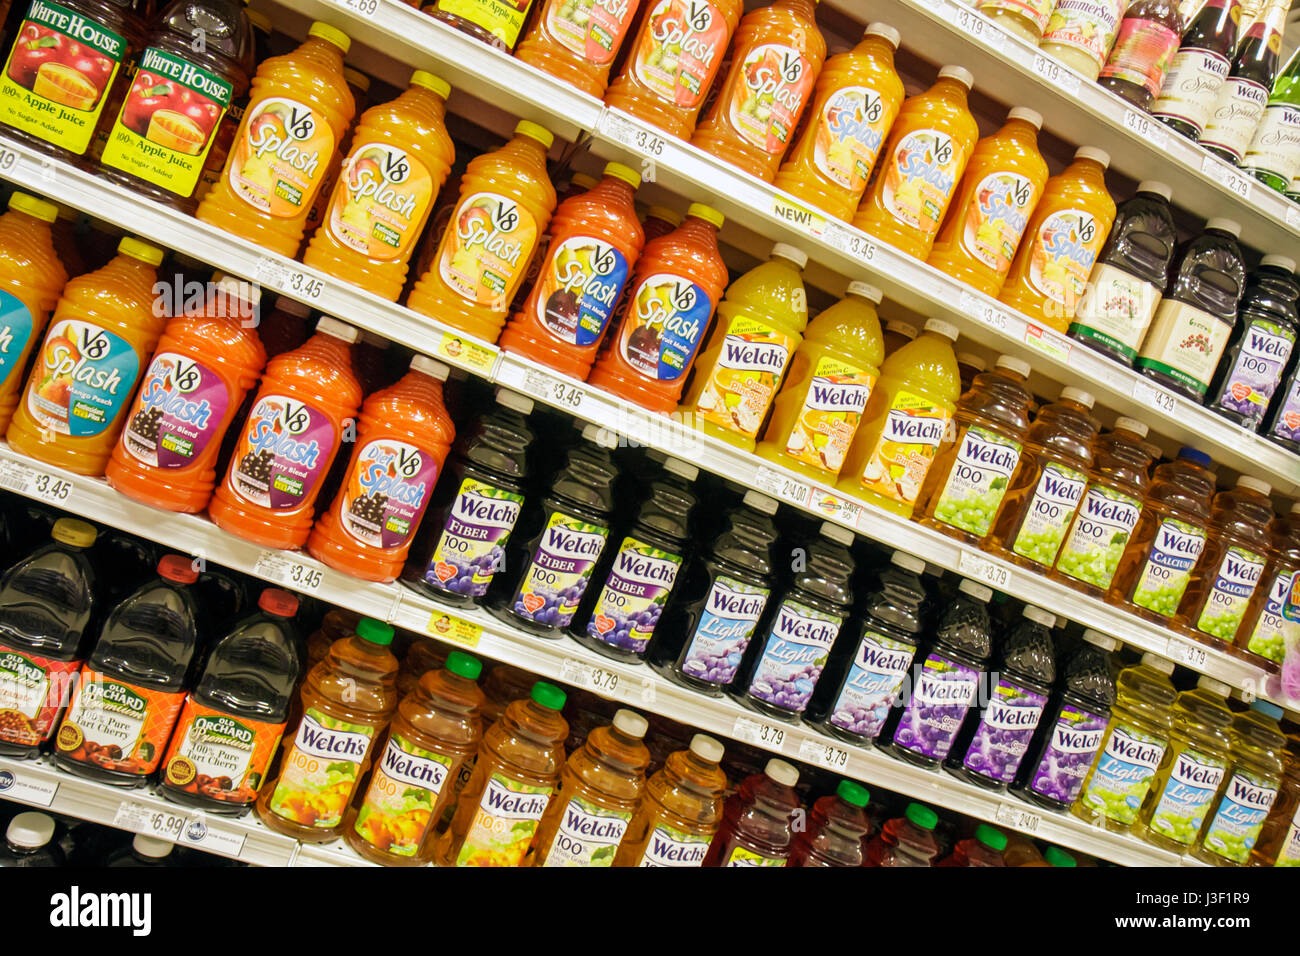 Display Fruit Juices In Supermarket High Resolution Stock Photography And Images Alamy